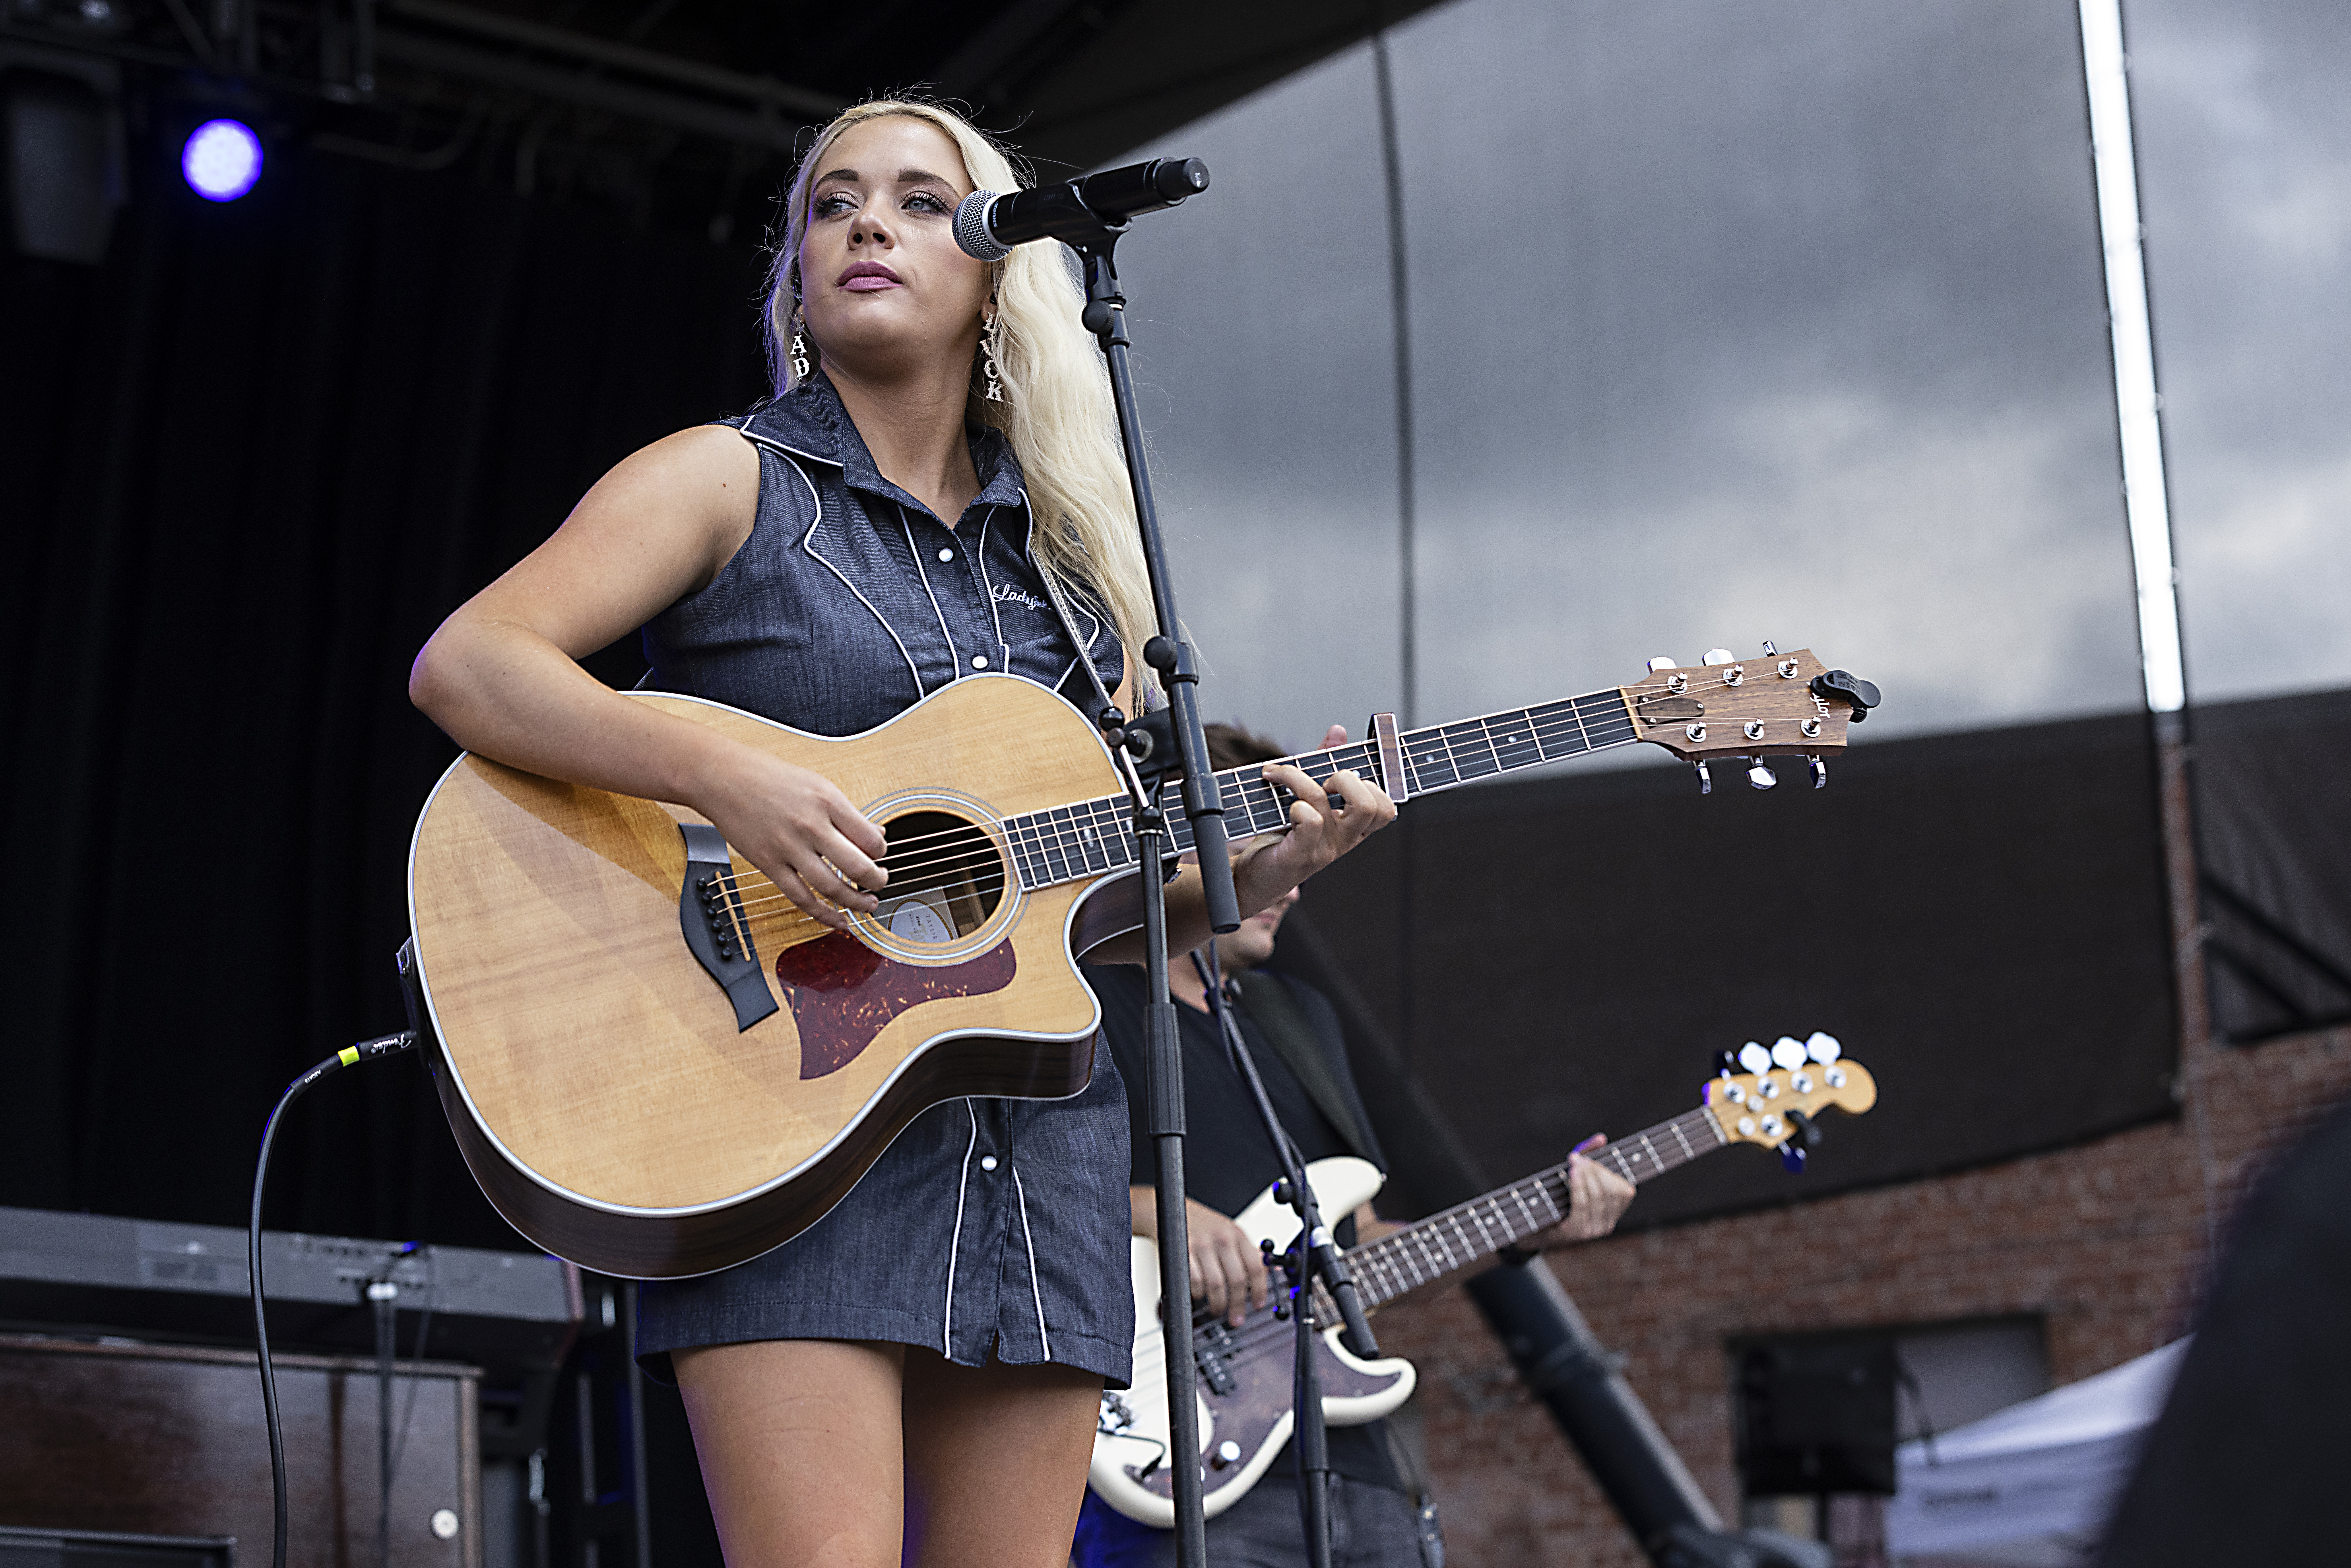 Megan Moroney performs at Charlotte Metro Credit Union Amphitheatre on August 27, 2022, in Charlotte, North Carolina. | Source: Getty Images